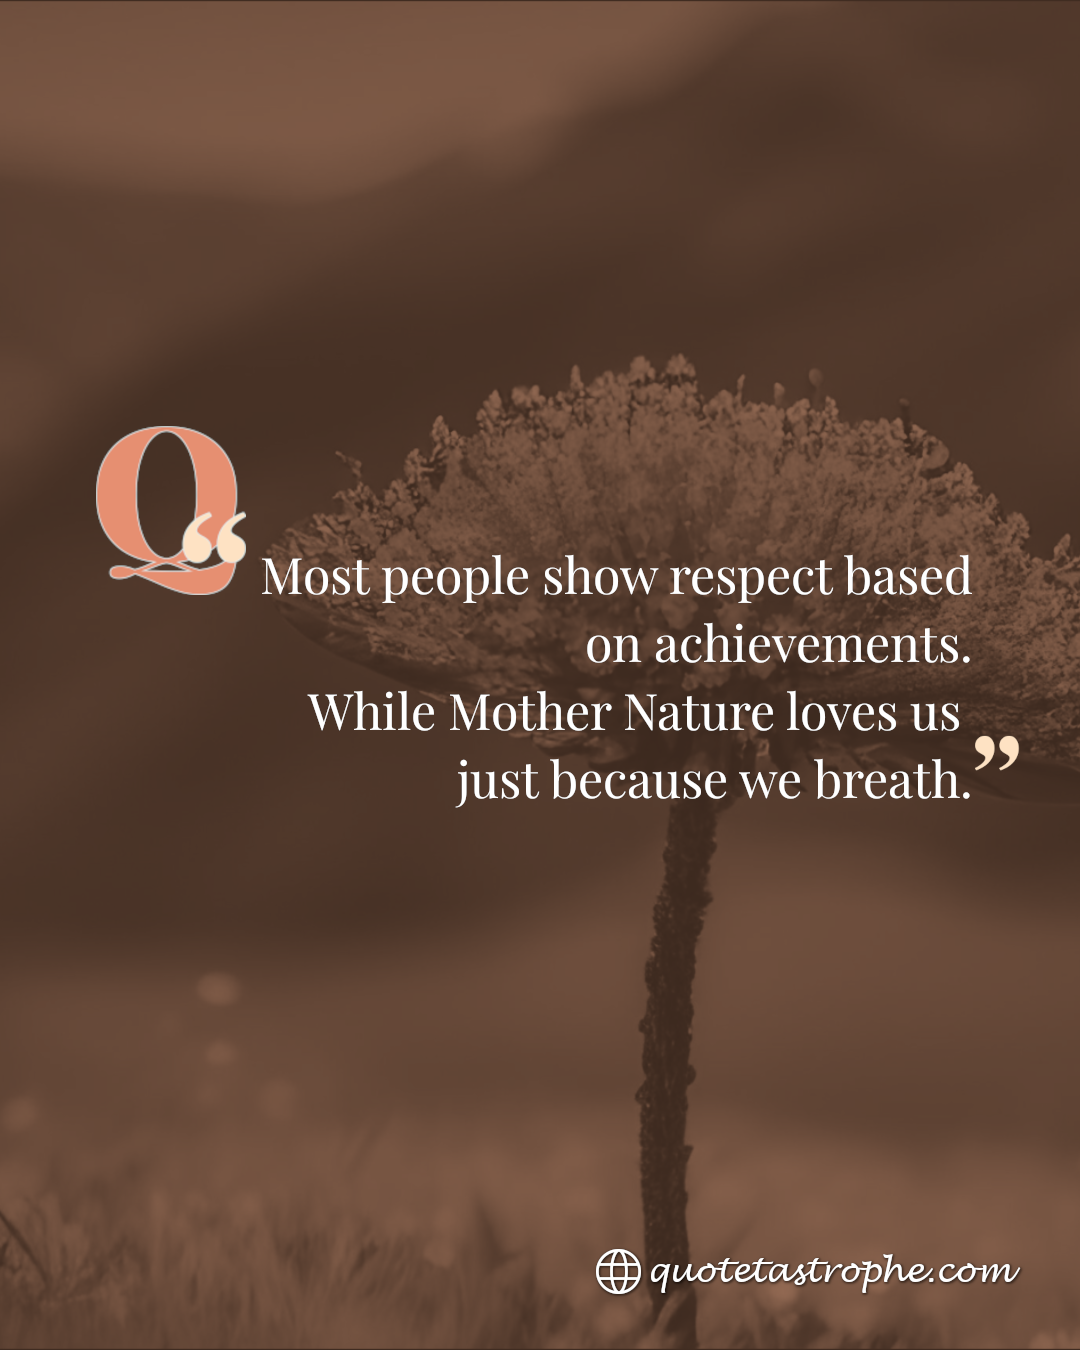 Most People Show Respect Based on Achievements